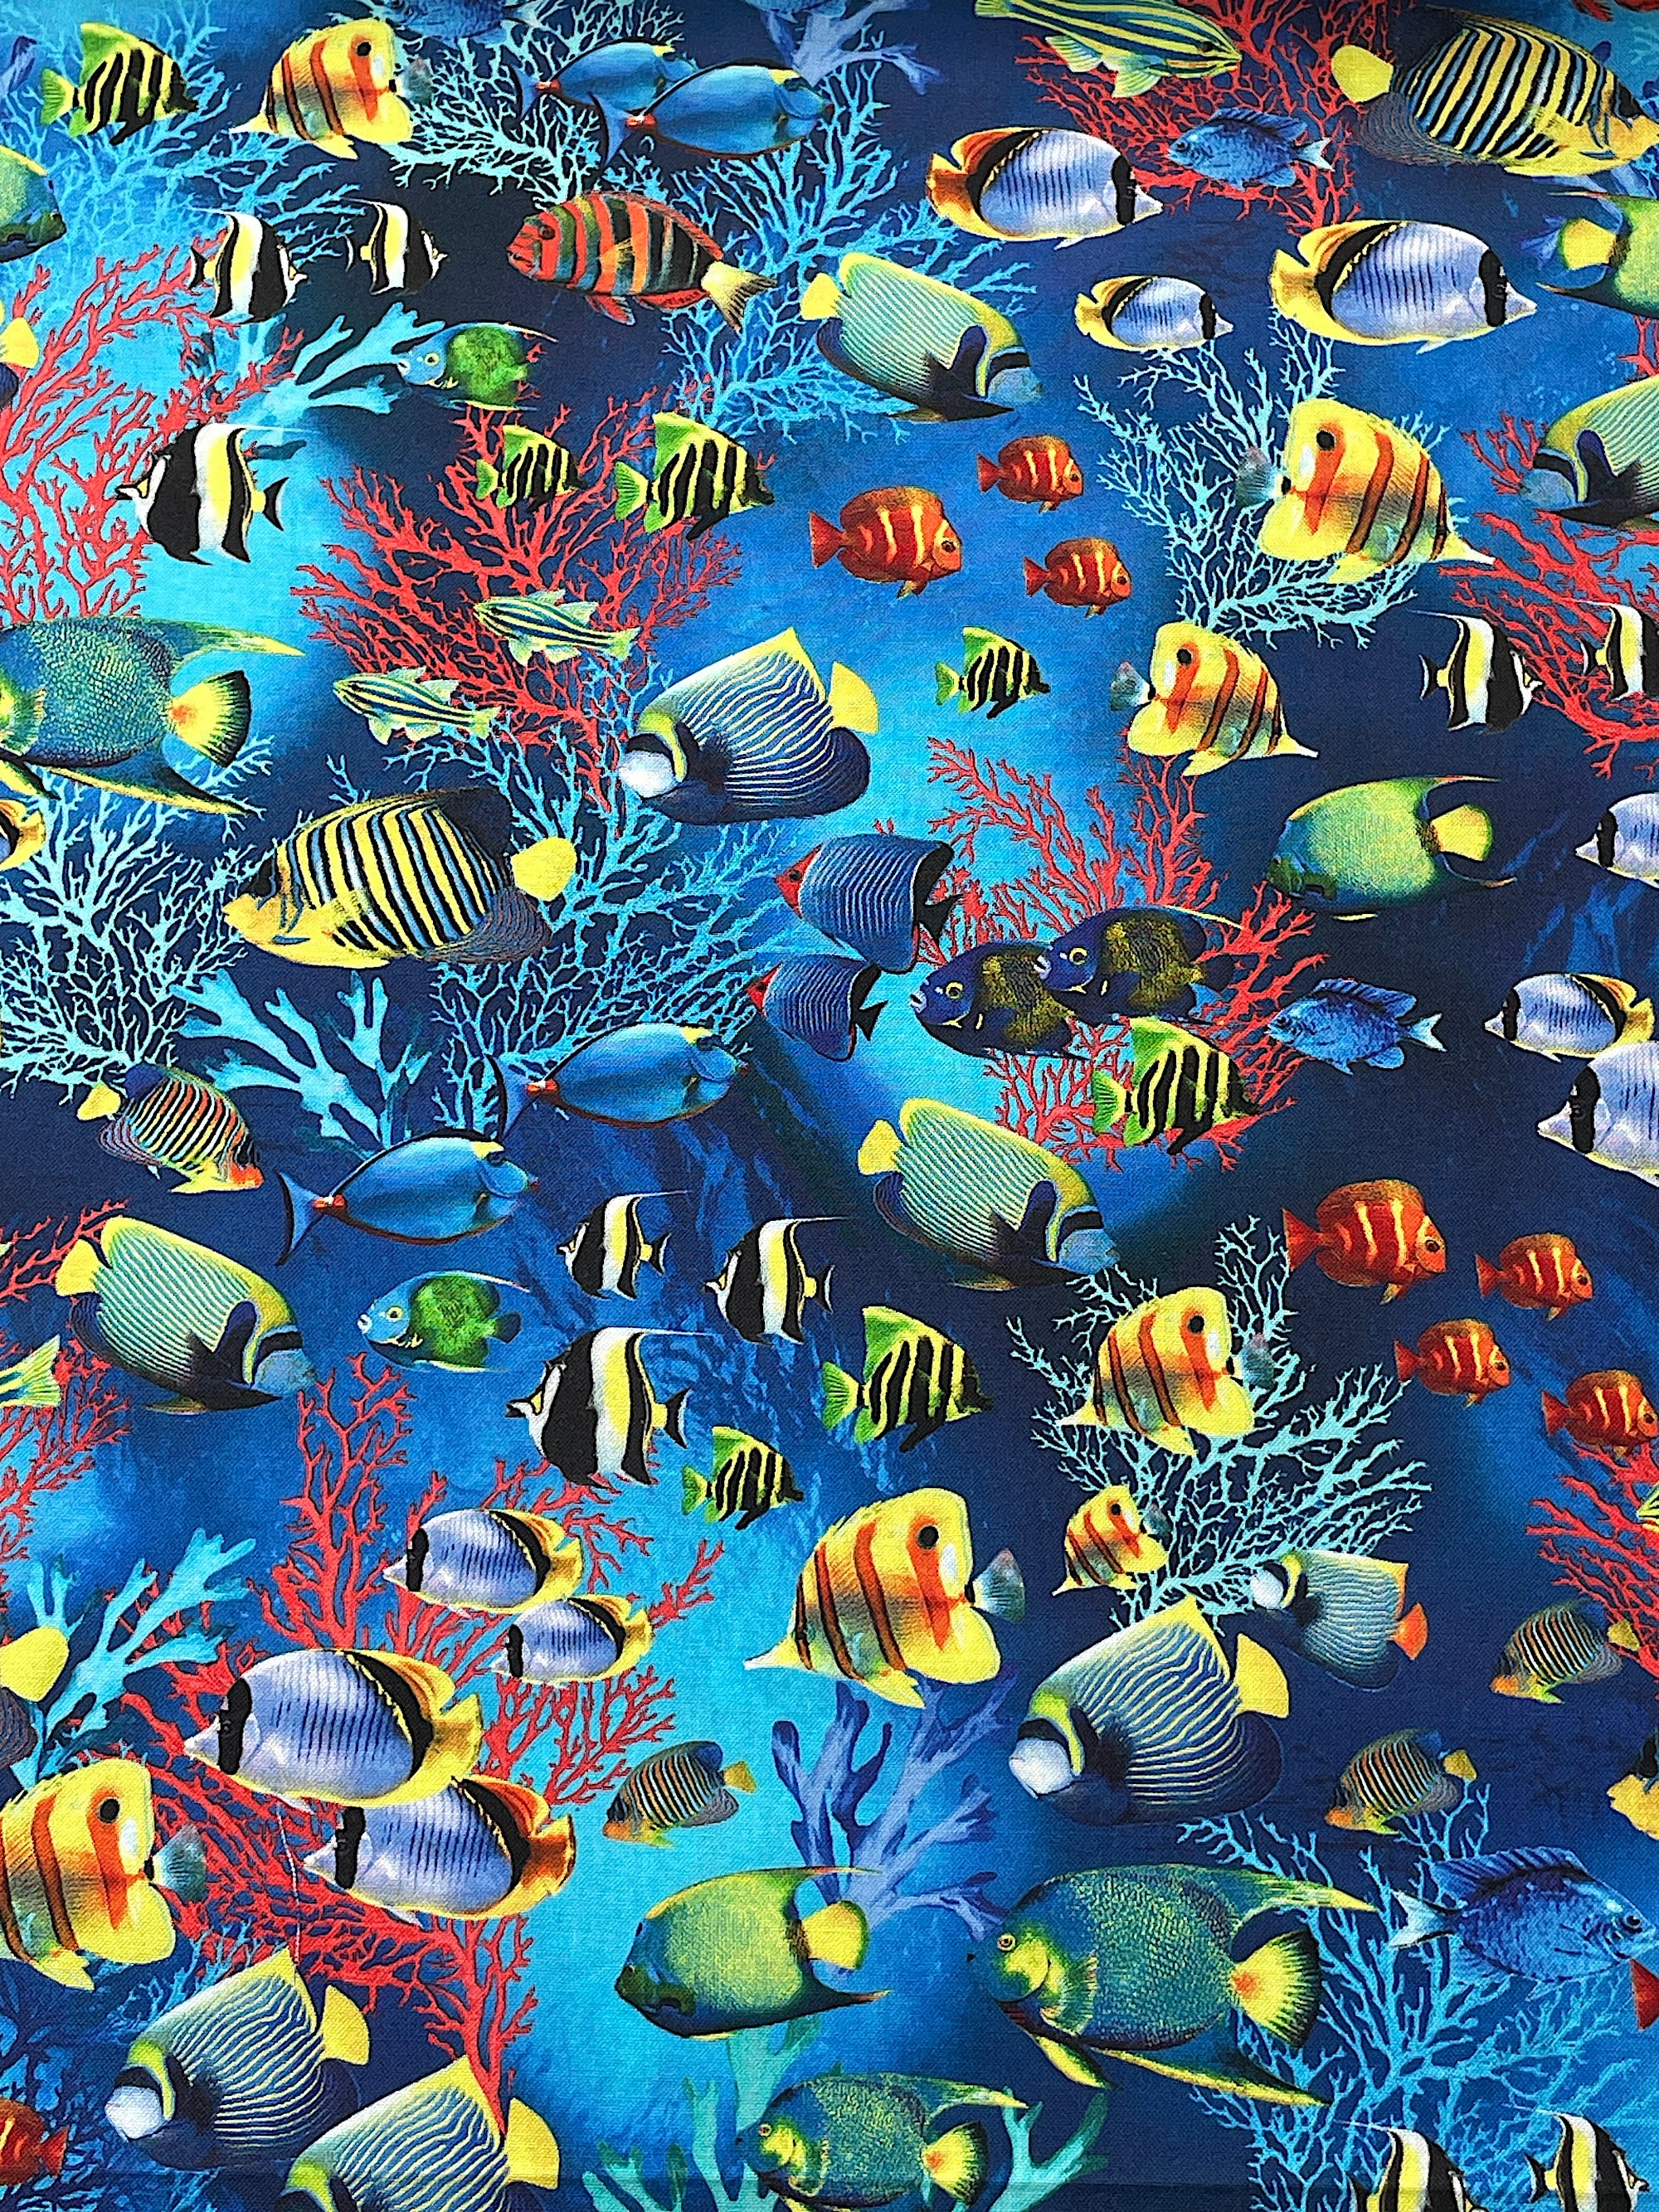 This nautical fabric is part of the Oceana collecton by Benartex.&nbsp; This fabric is called Jewel of the Sea Multi and is covered with saltwater fish swimming in the ocean.